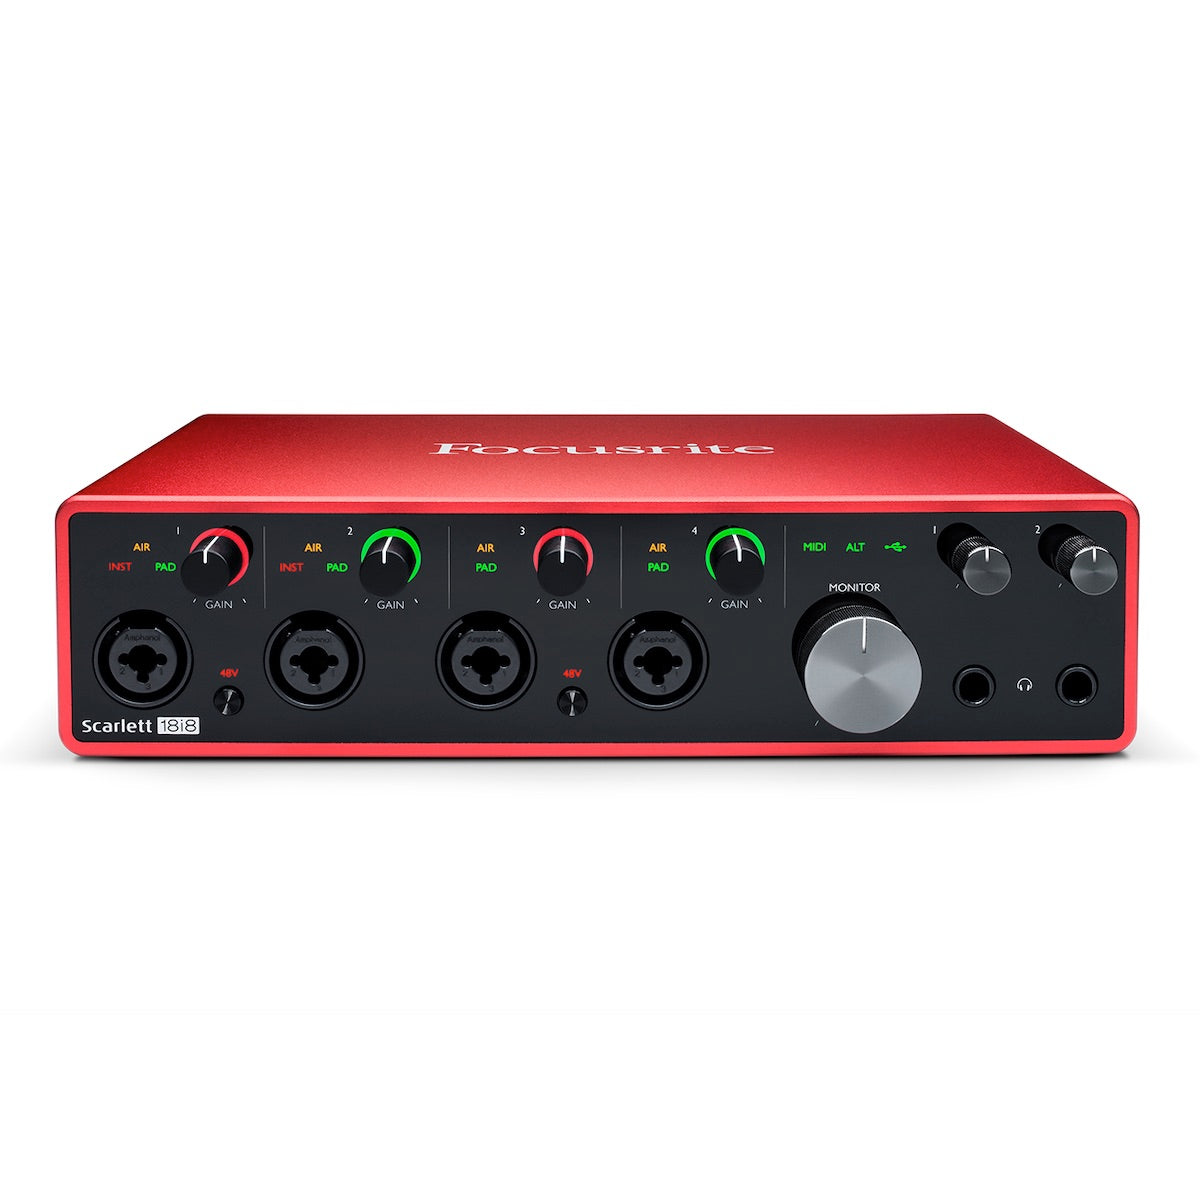 Focusrite Scarlett 18i8 - USB 2.0 Audio Interface with 18-in/8-out (3rd Gen)